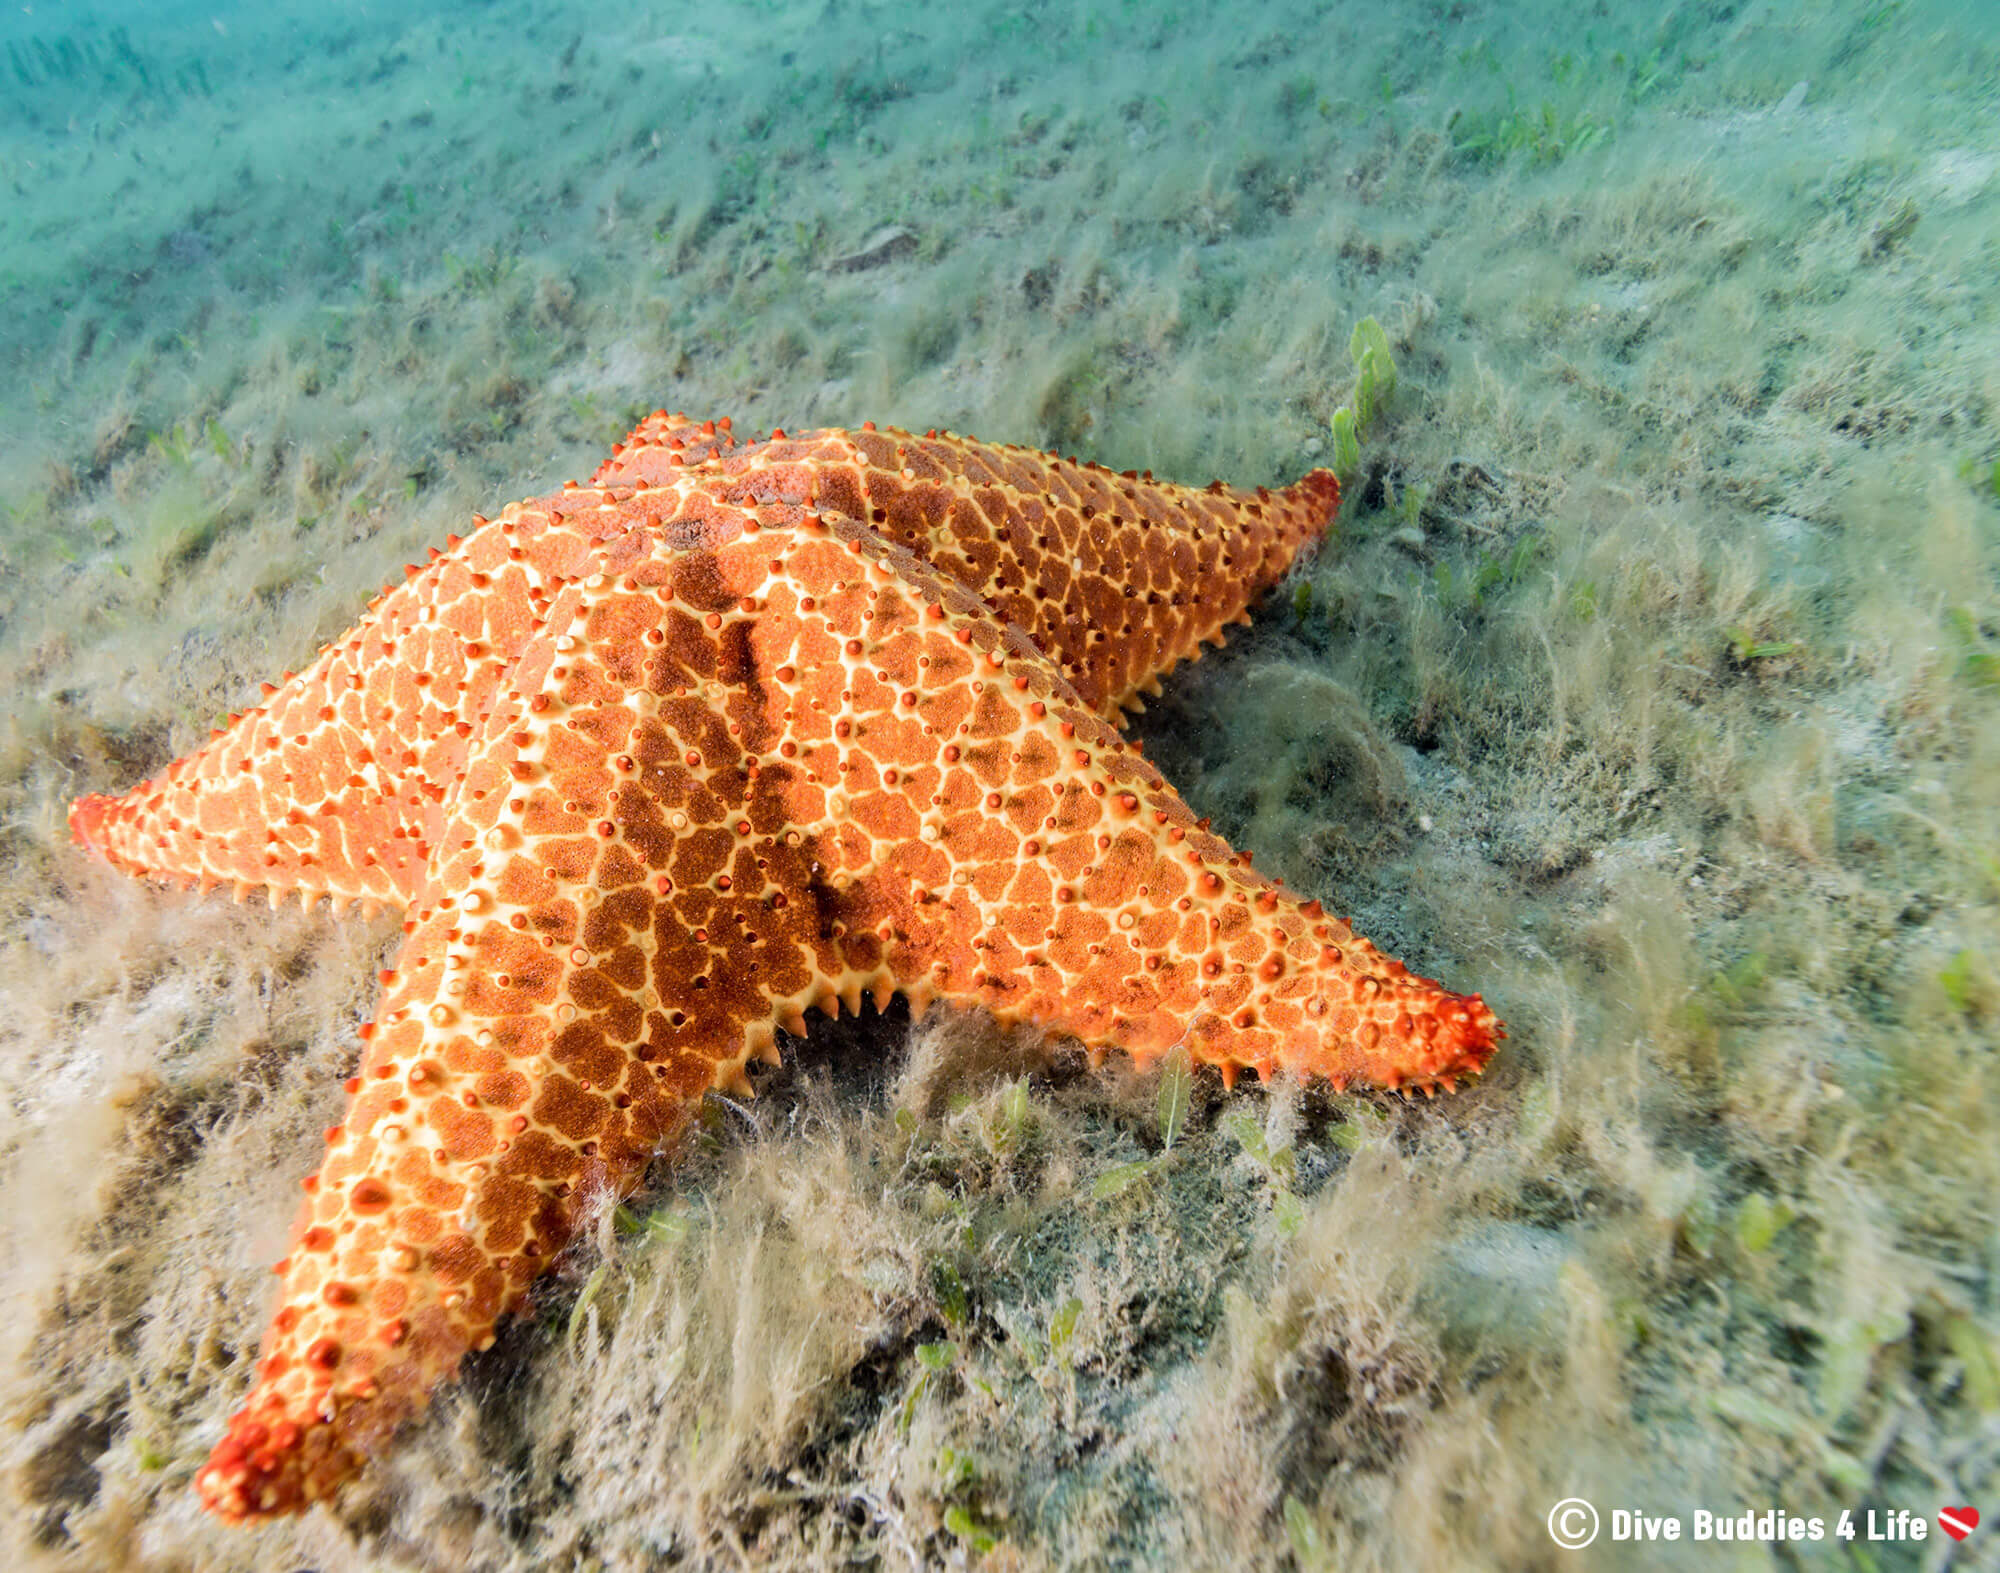 A Giant Sea Star in the Mud At BHB, Florida, USA